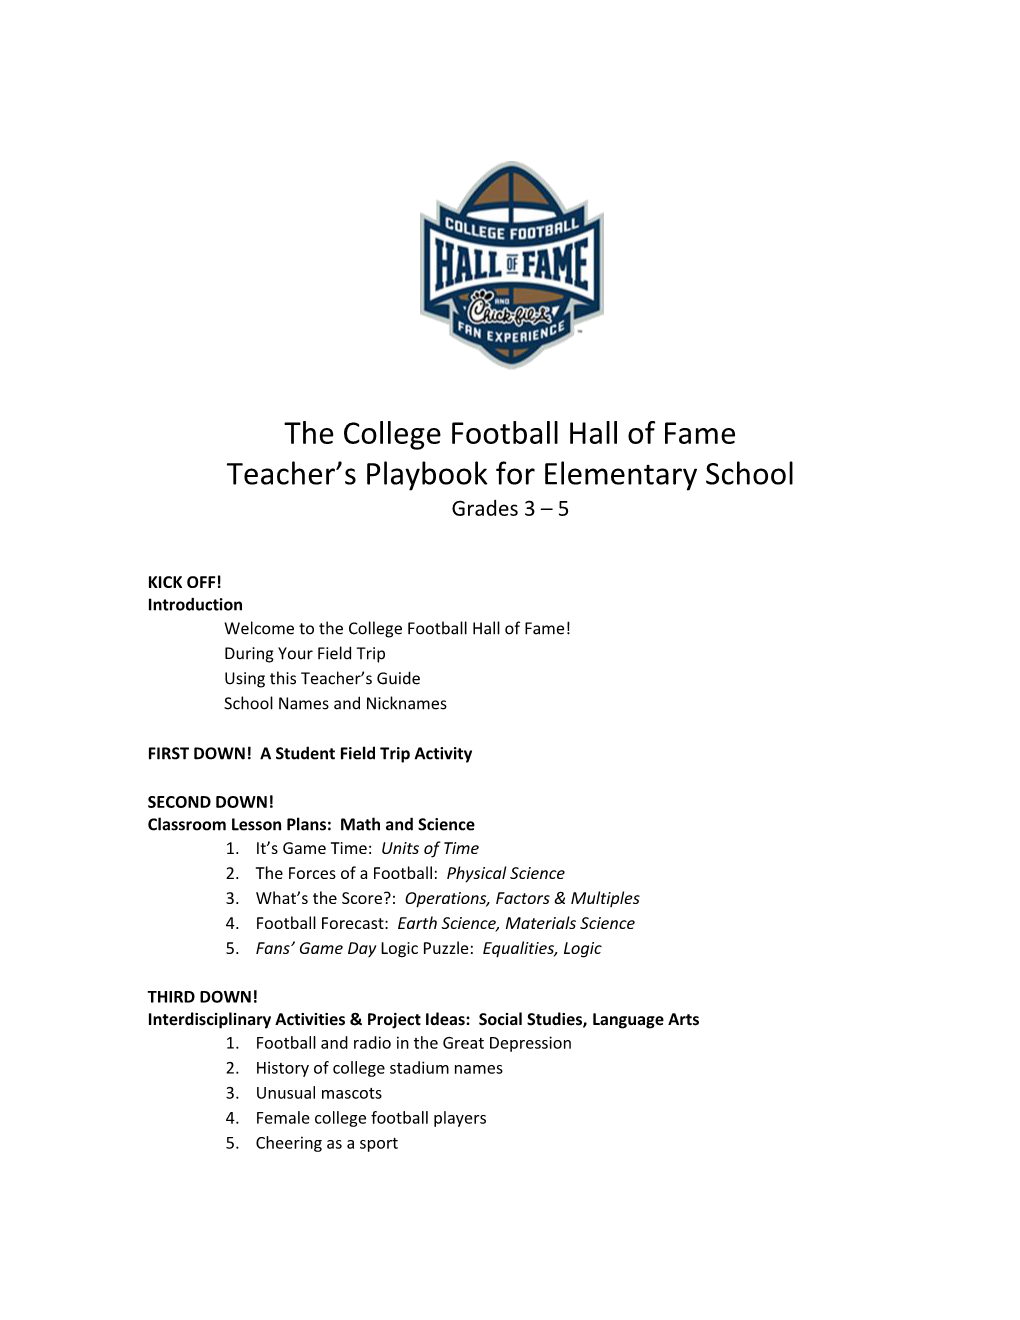 The College Football Hall of Fame Teacher's Playbook for Elementary